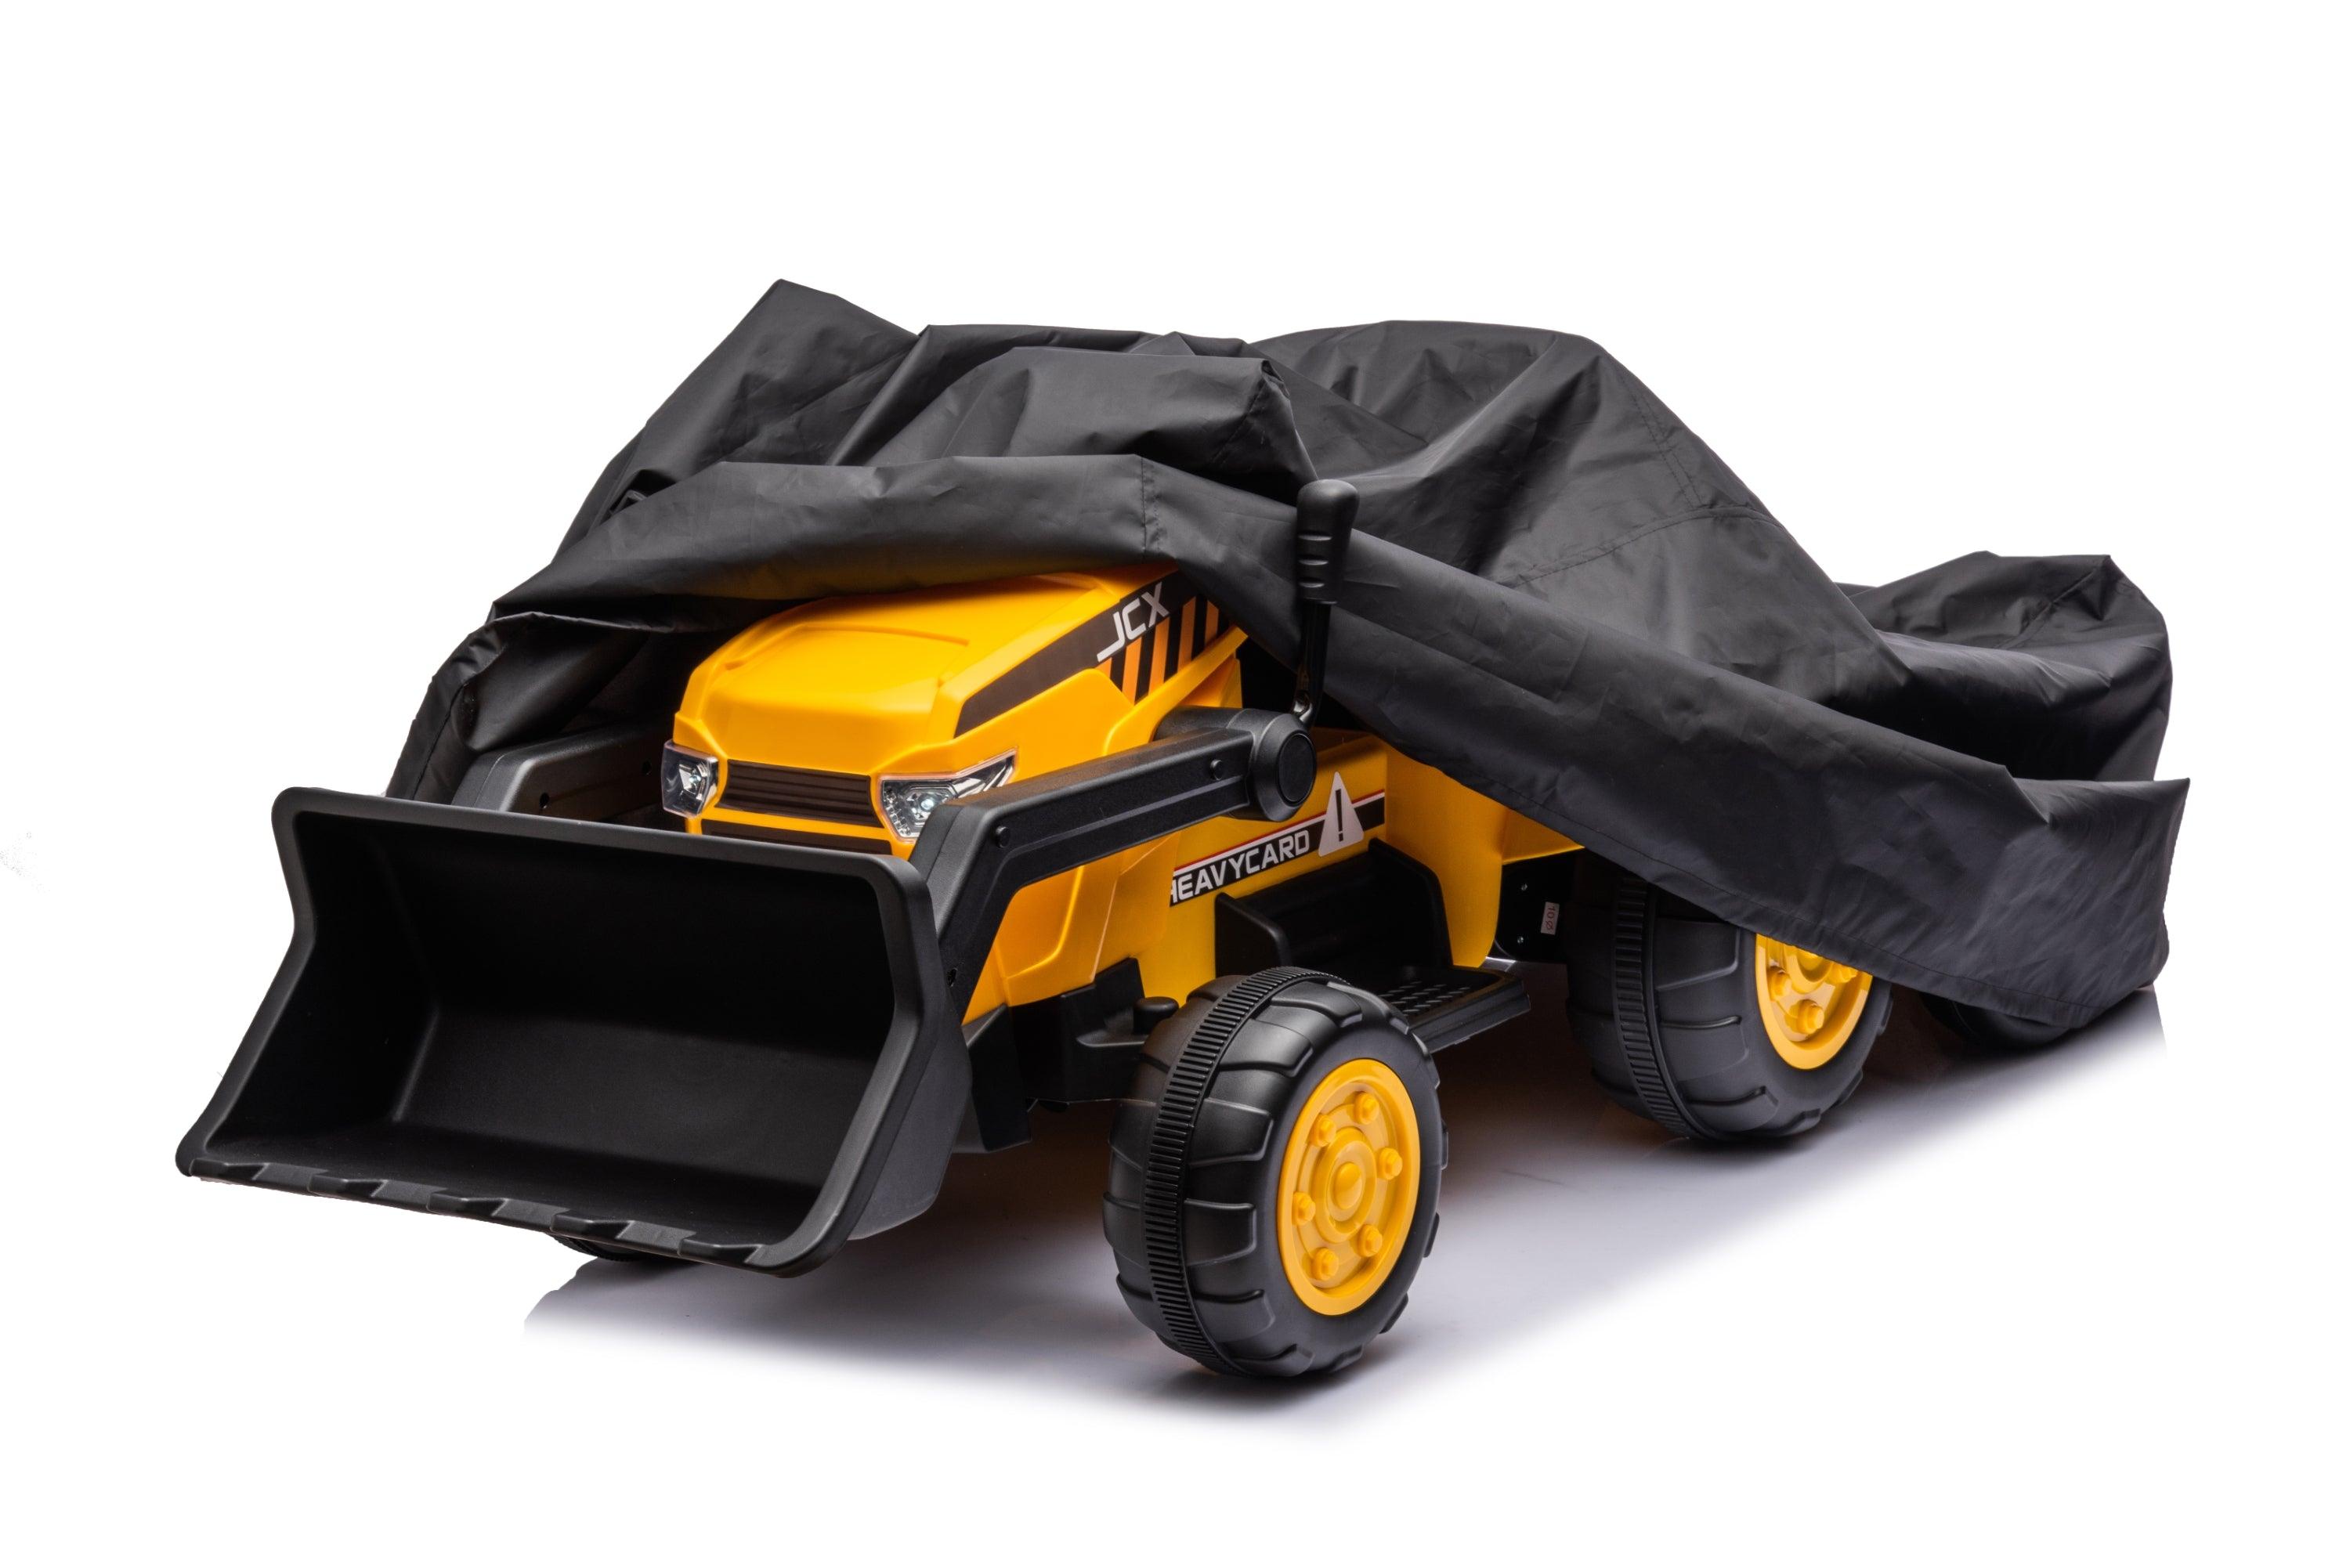 Ride on car Covers. A shield against rain, sun, dust, snow, and leaves - DTI Direct USA